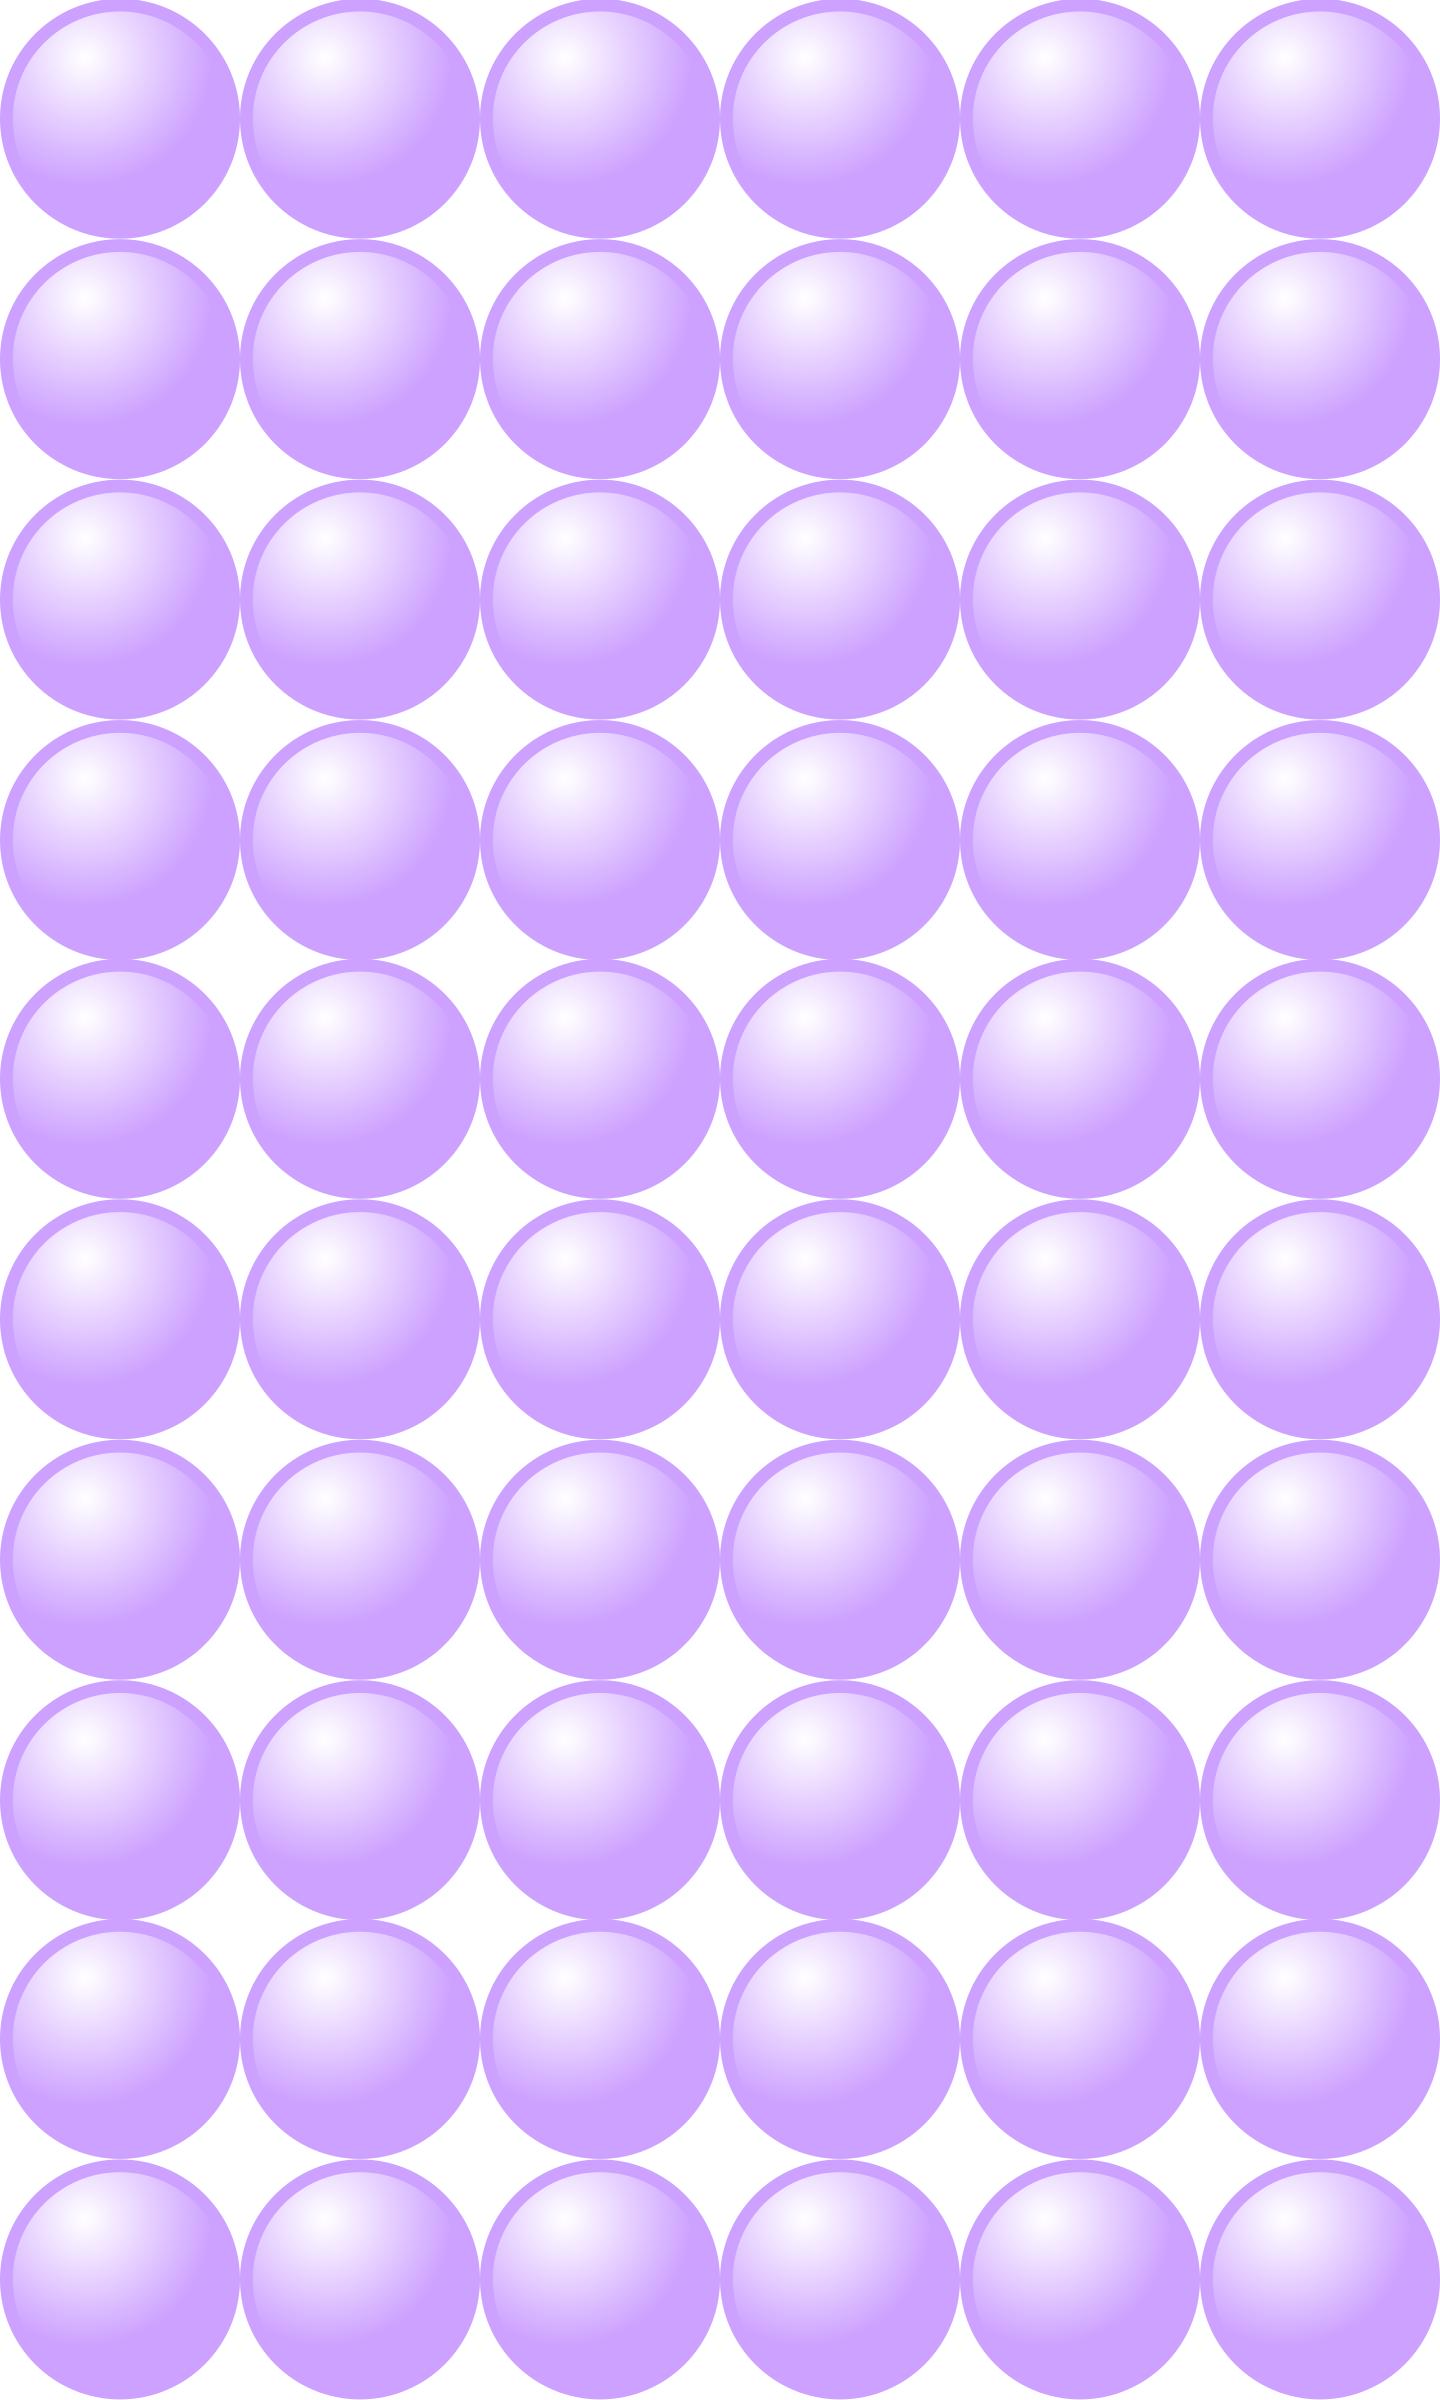 Beads quantitative picture for multiplication 10x6 png